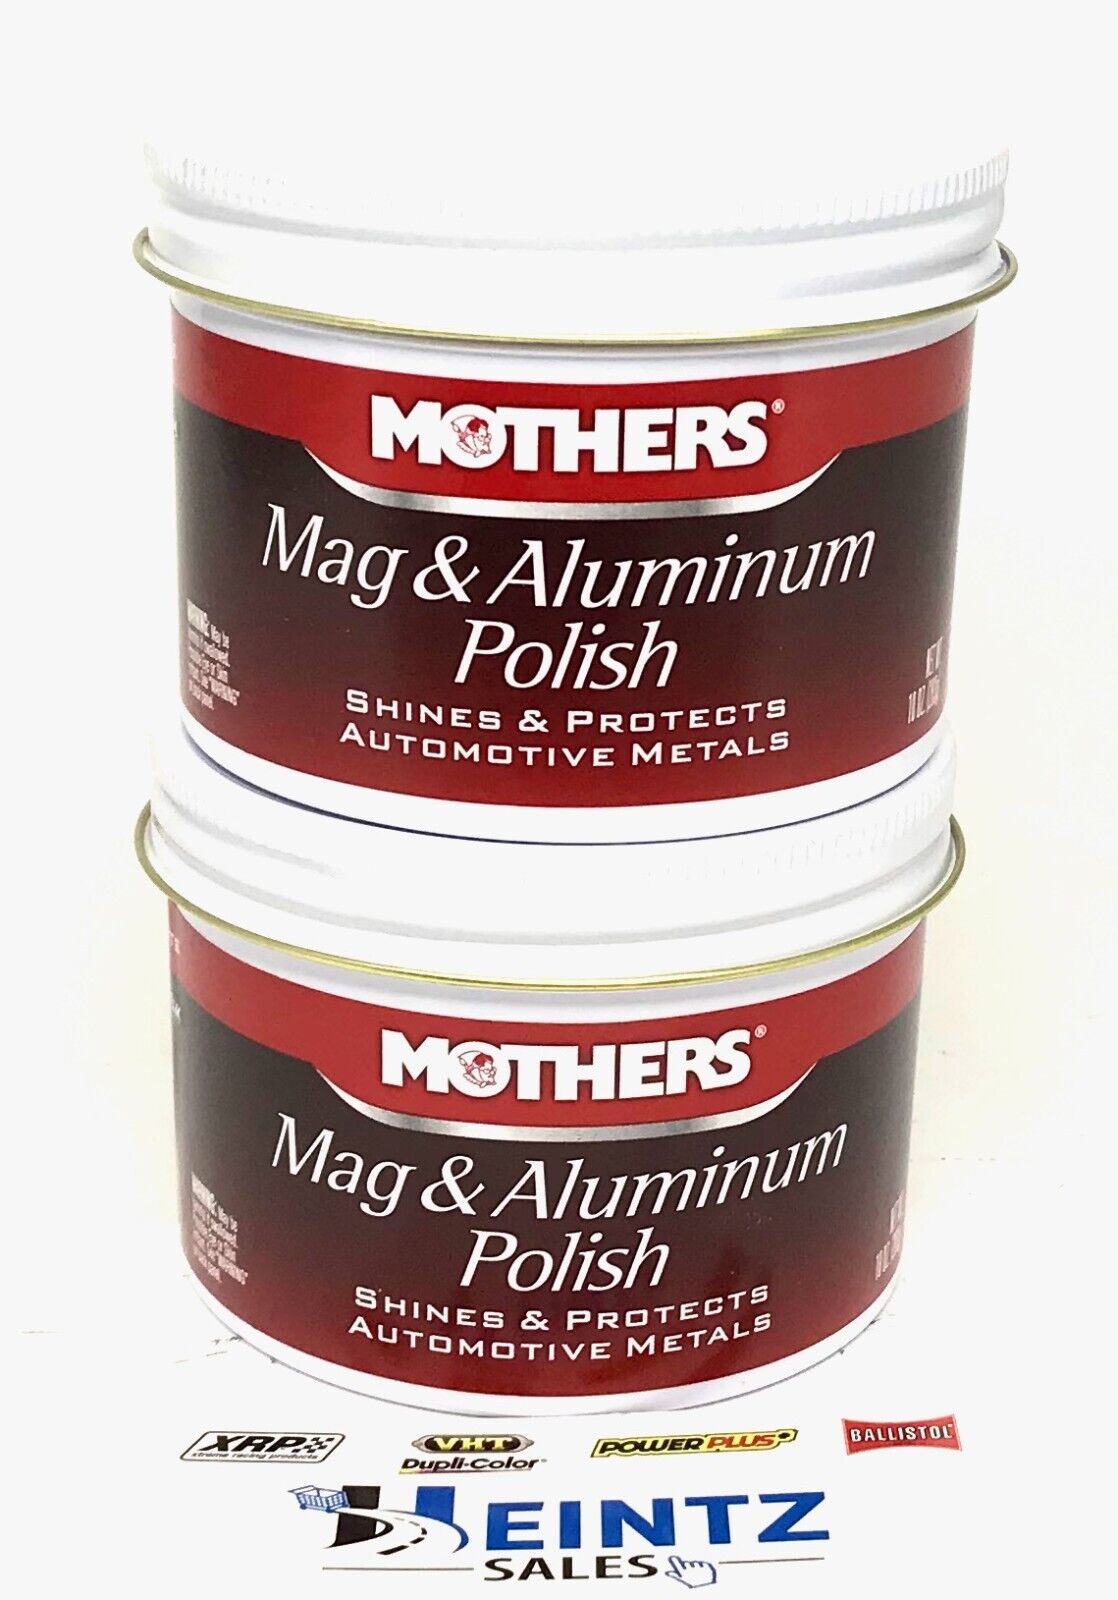 Mothers Mag And Aluminum Automotive Metals Polish Paste 5 oz. (Pack of 2)